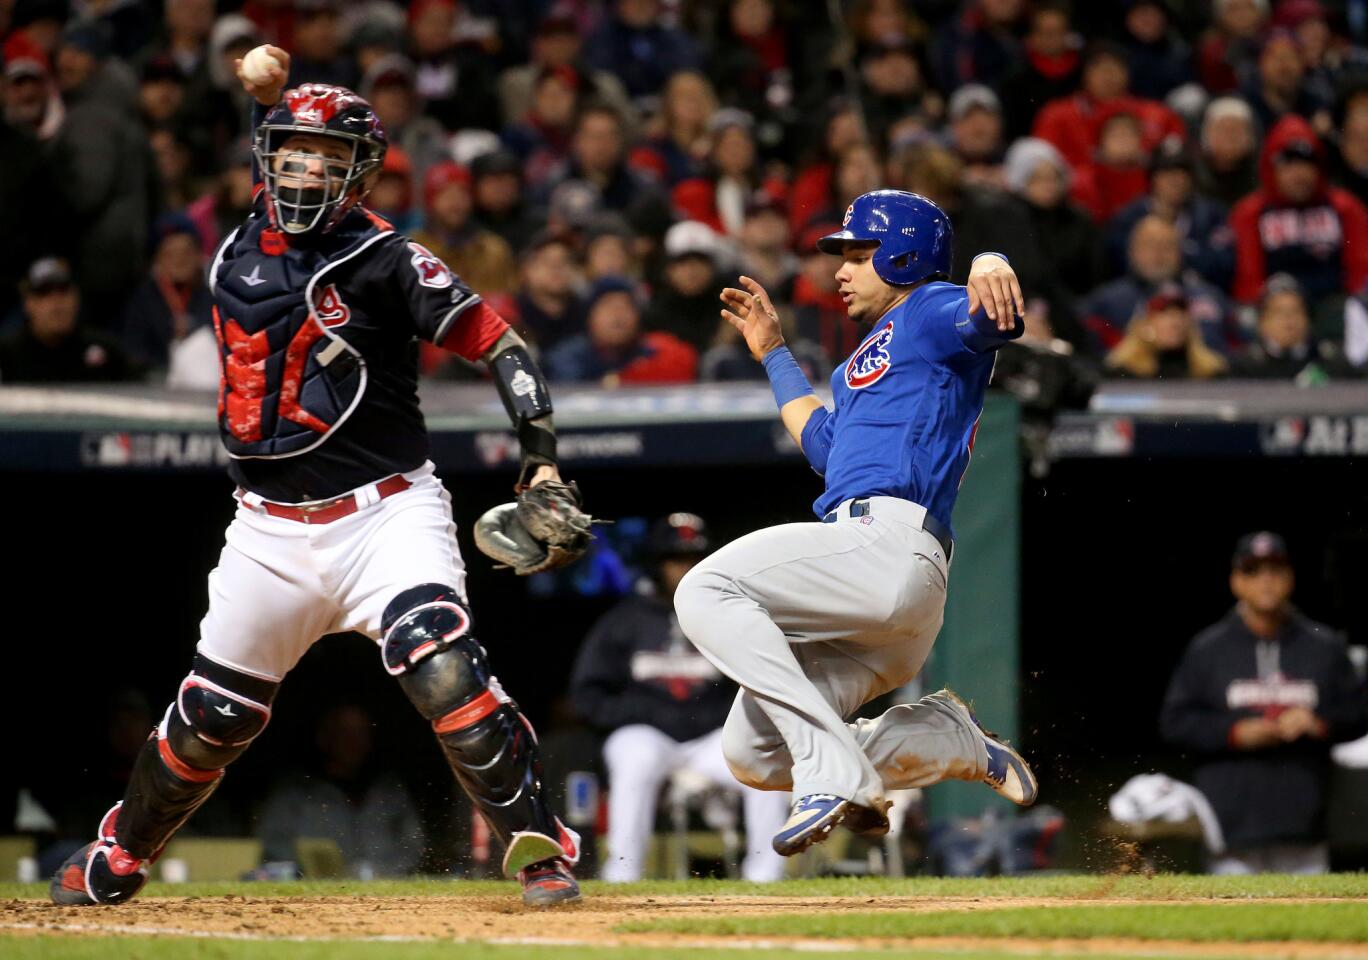 World Series Game 2: Cubs 5, Indians 1 - Los Angeles Times